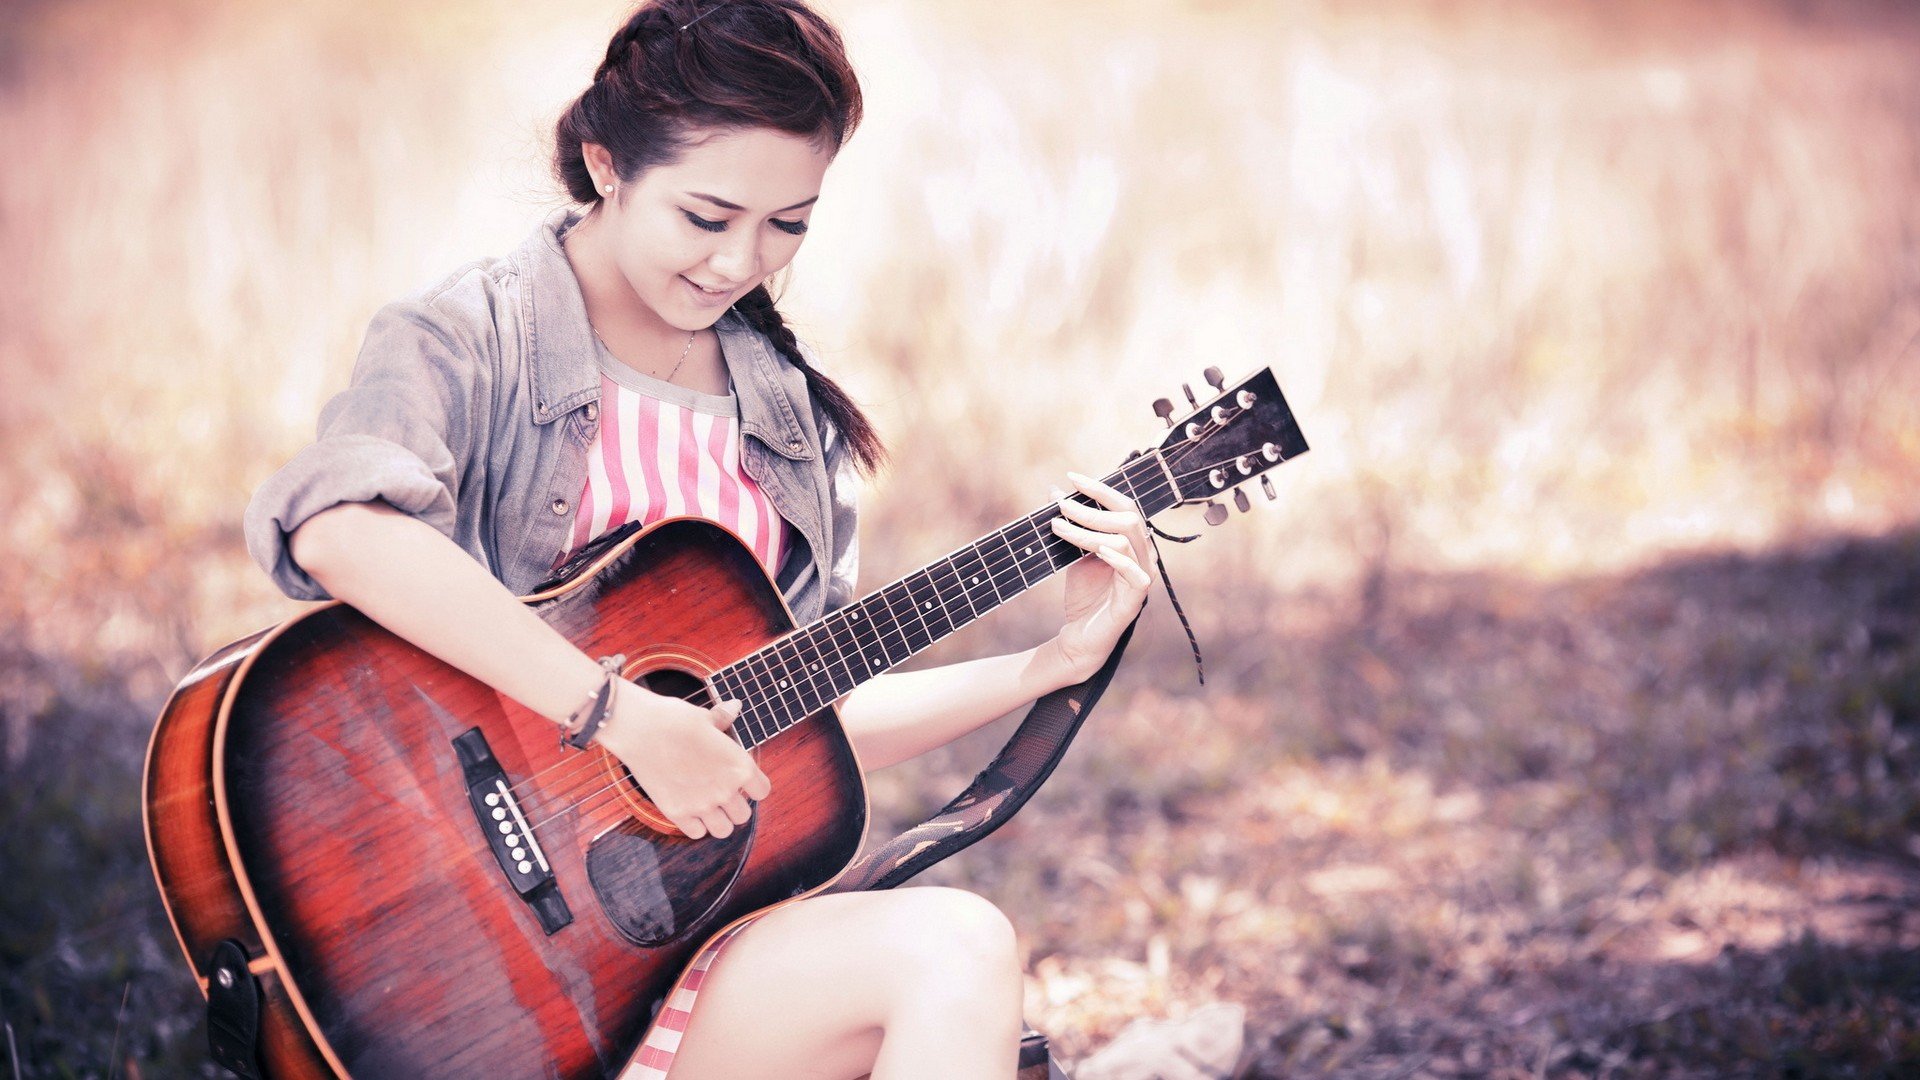 Cute Stylish Girls With Guitar In Happy Mood Wallpapers